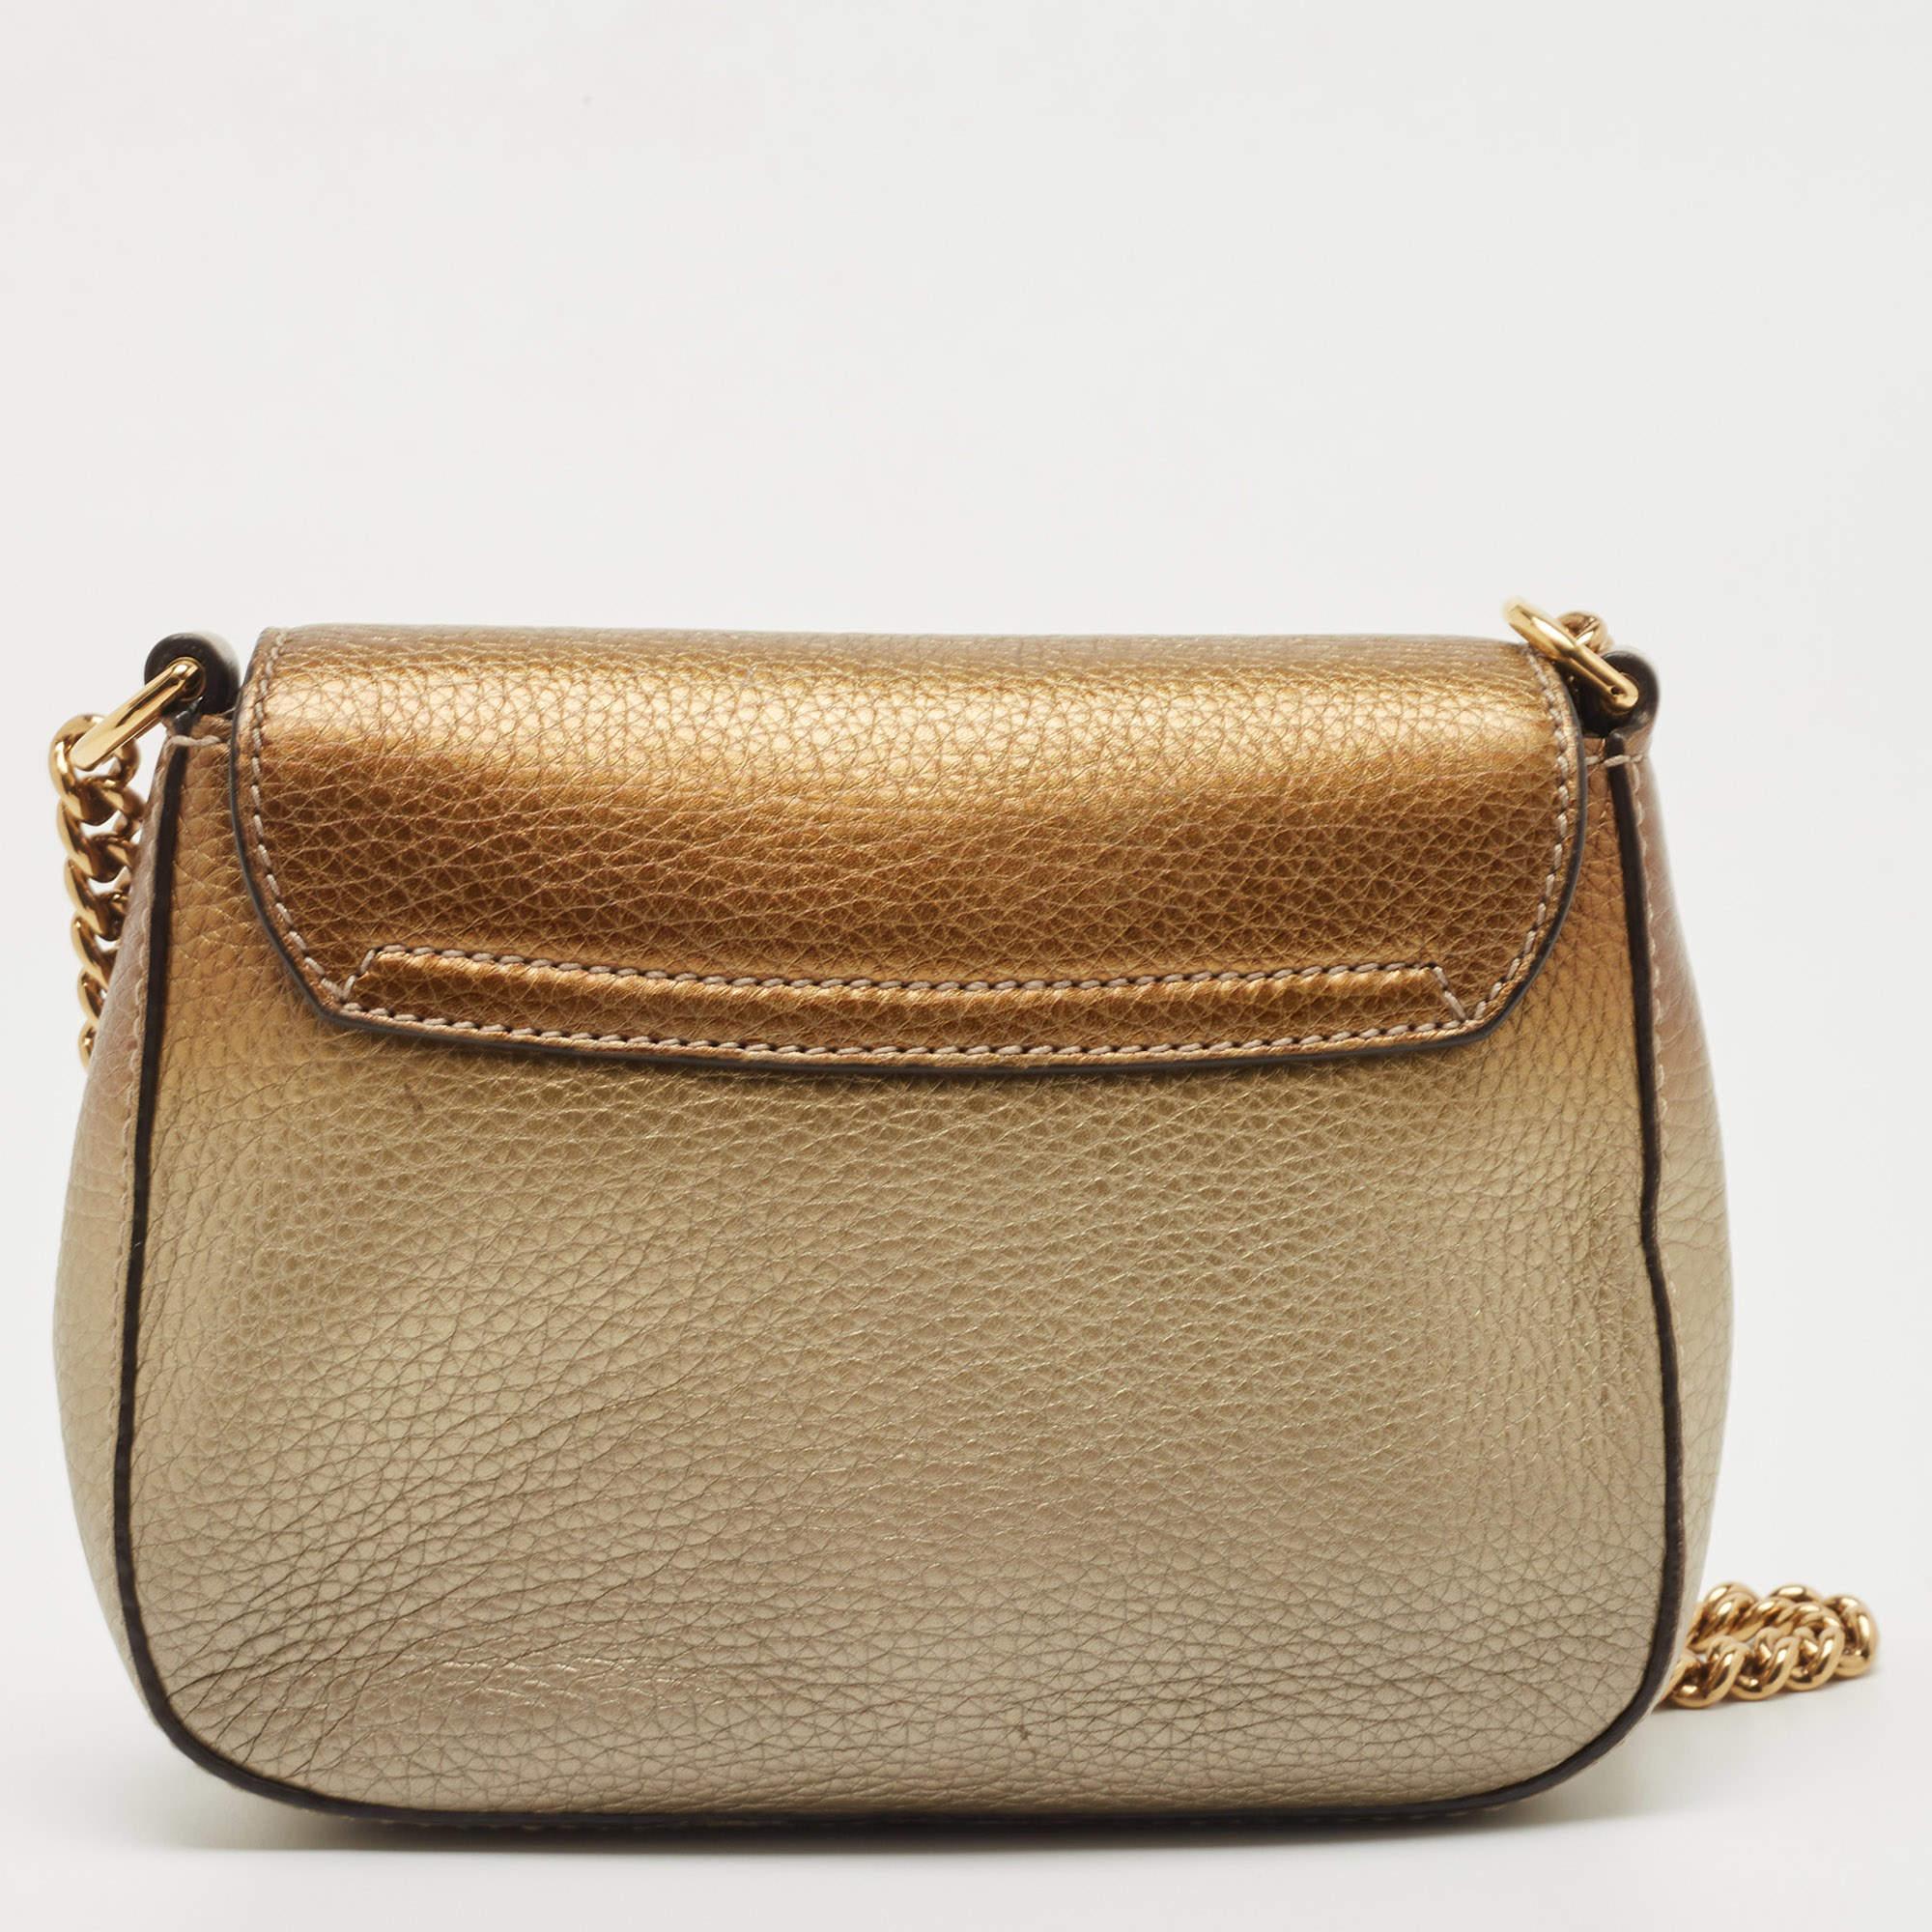 Gucci Ombre Gold Leather Soho Flap Crossbody Bag 3